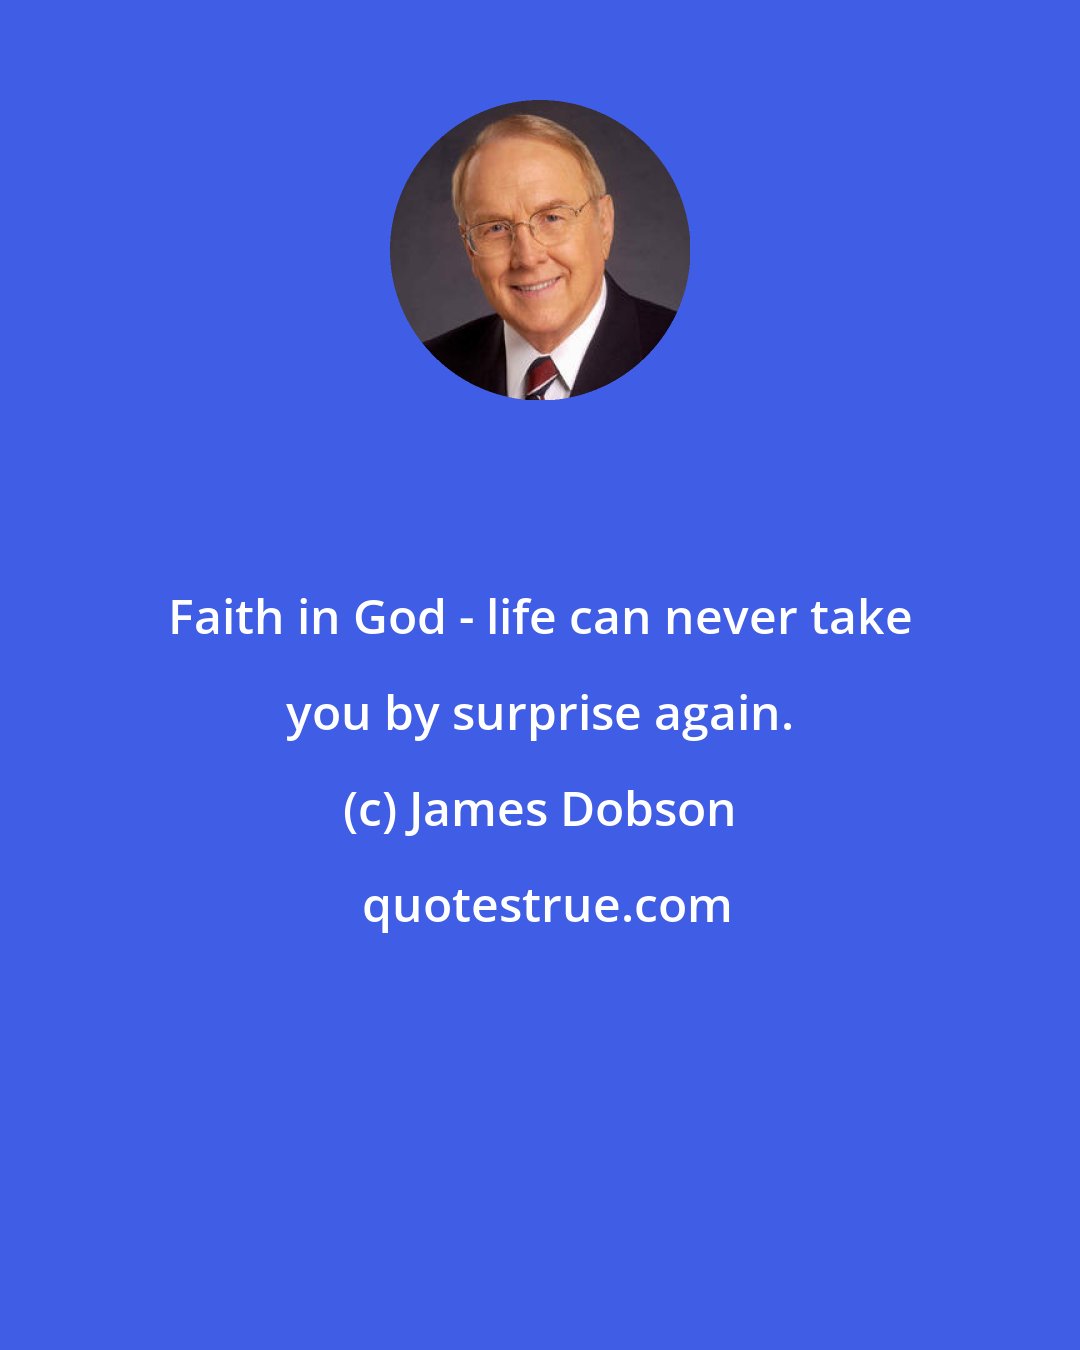 James Dobson: Faith in God - life can never take you by surprise again.